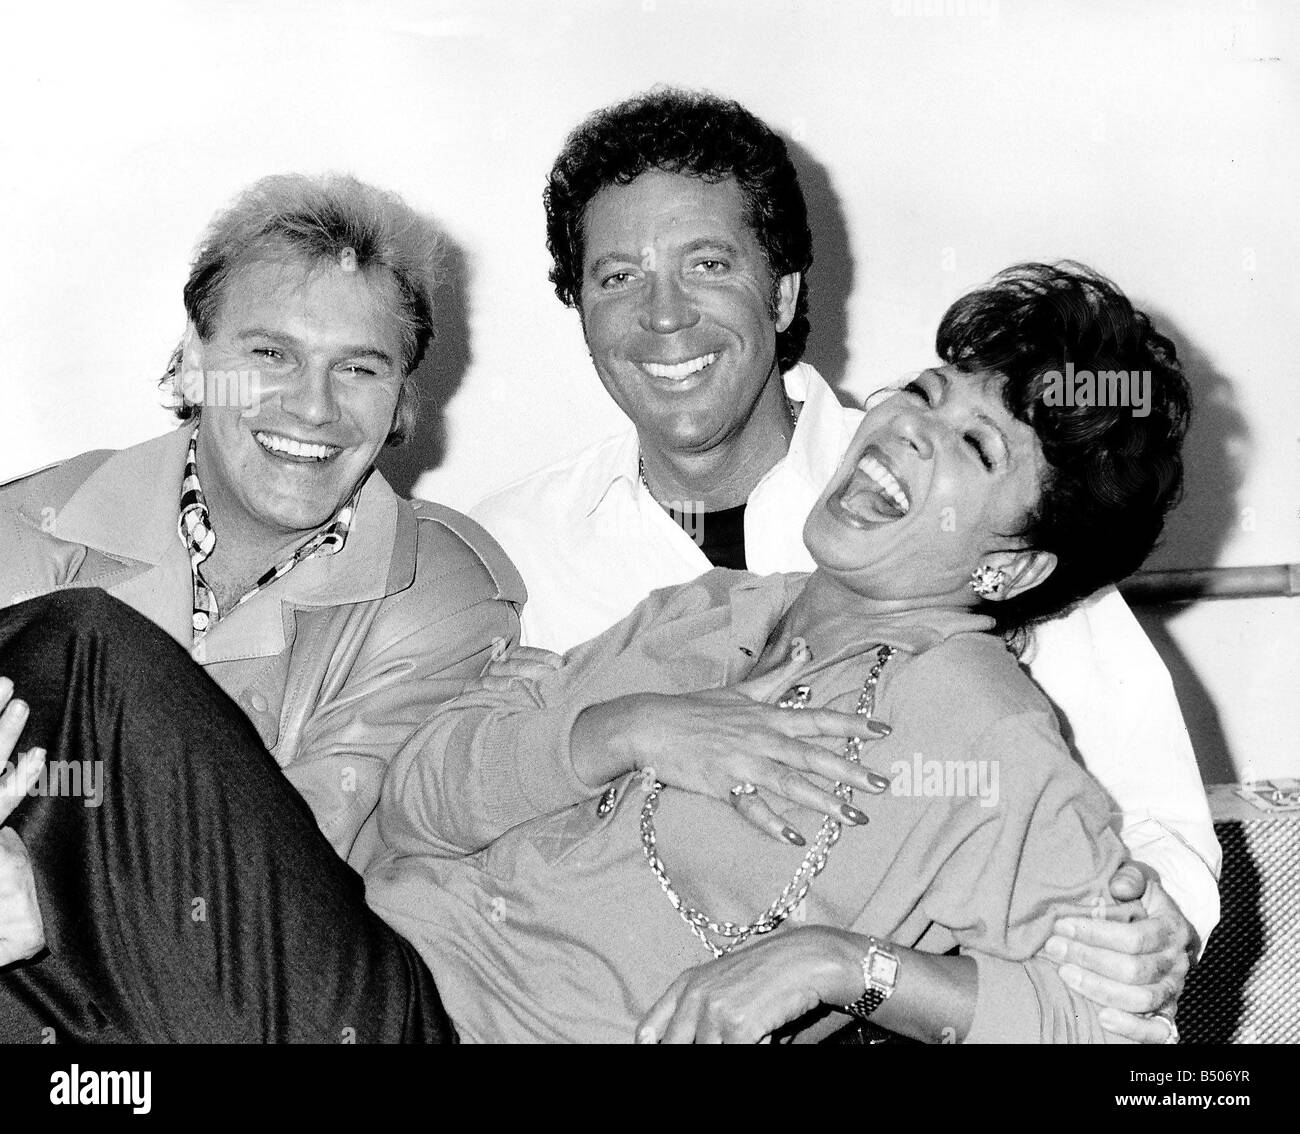 Tom Jones the singer with co stars Freddy Starr and Shirley Bassey at the Des O conner christmas special show Stock Photo